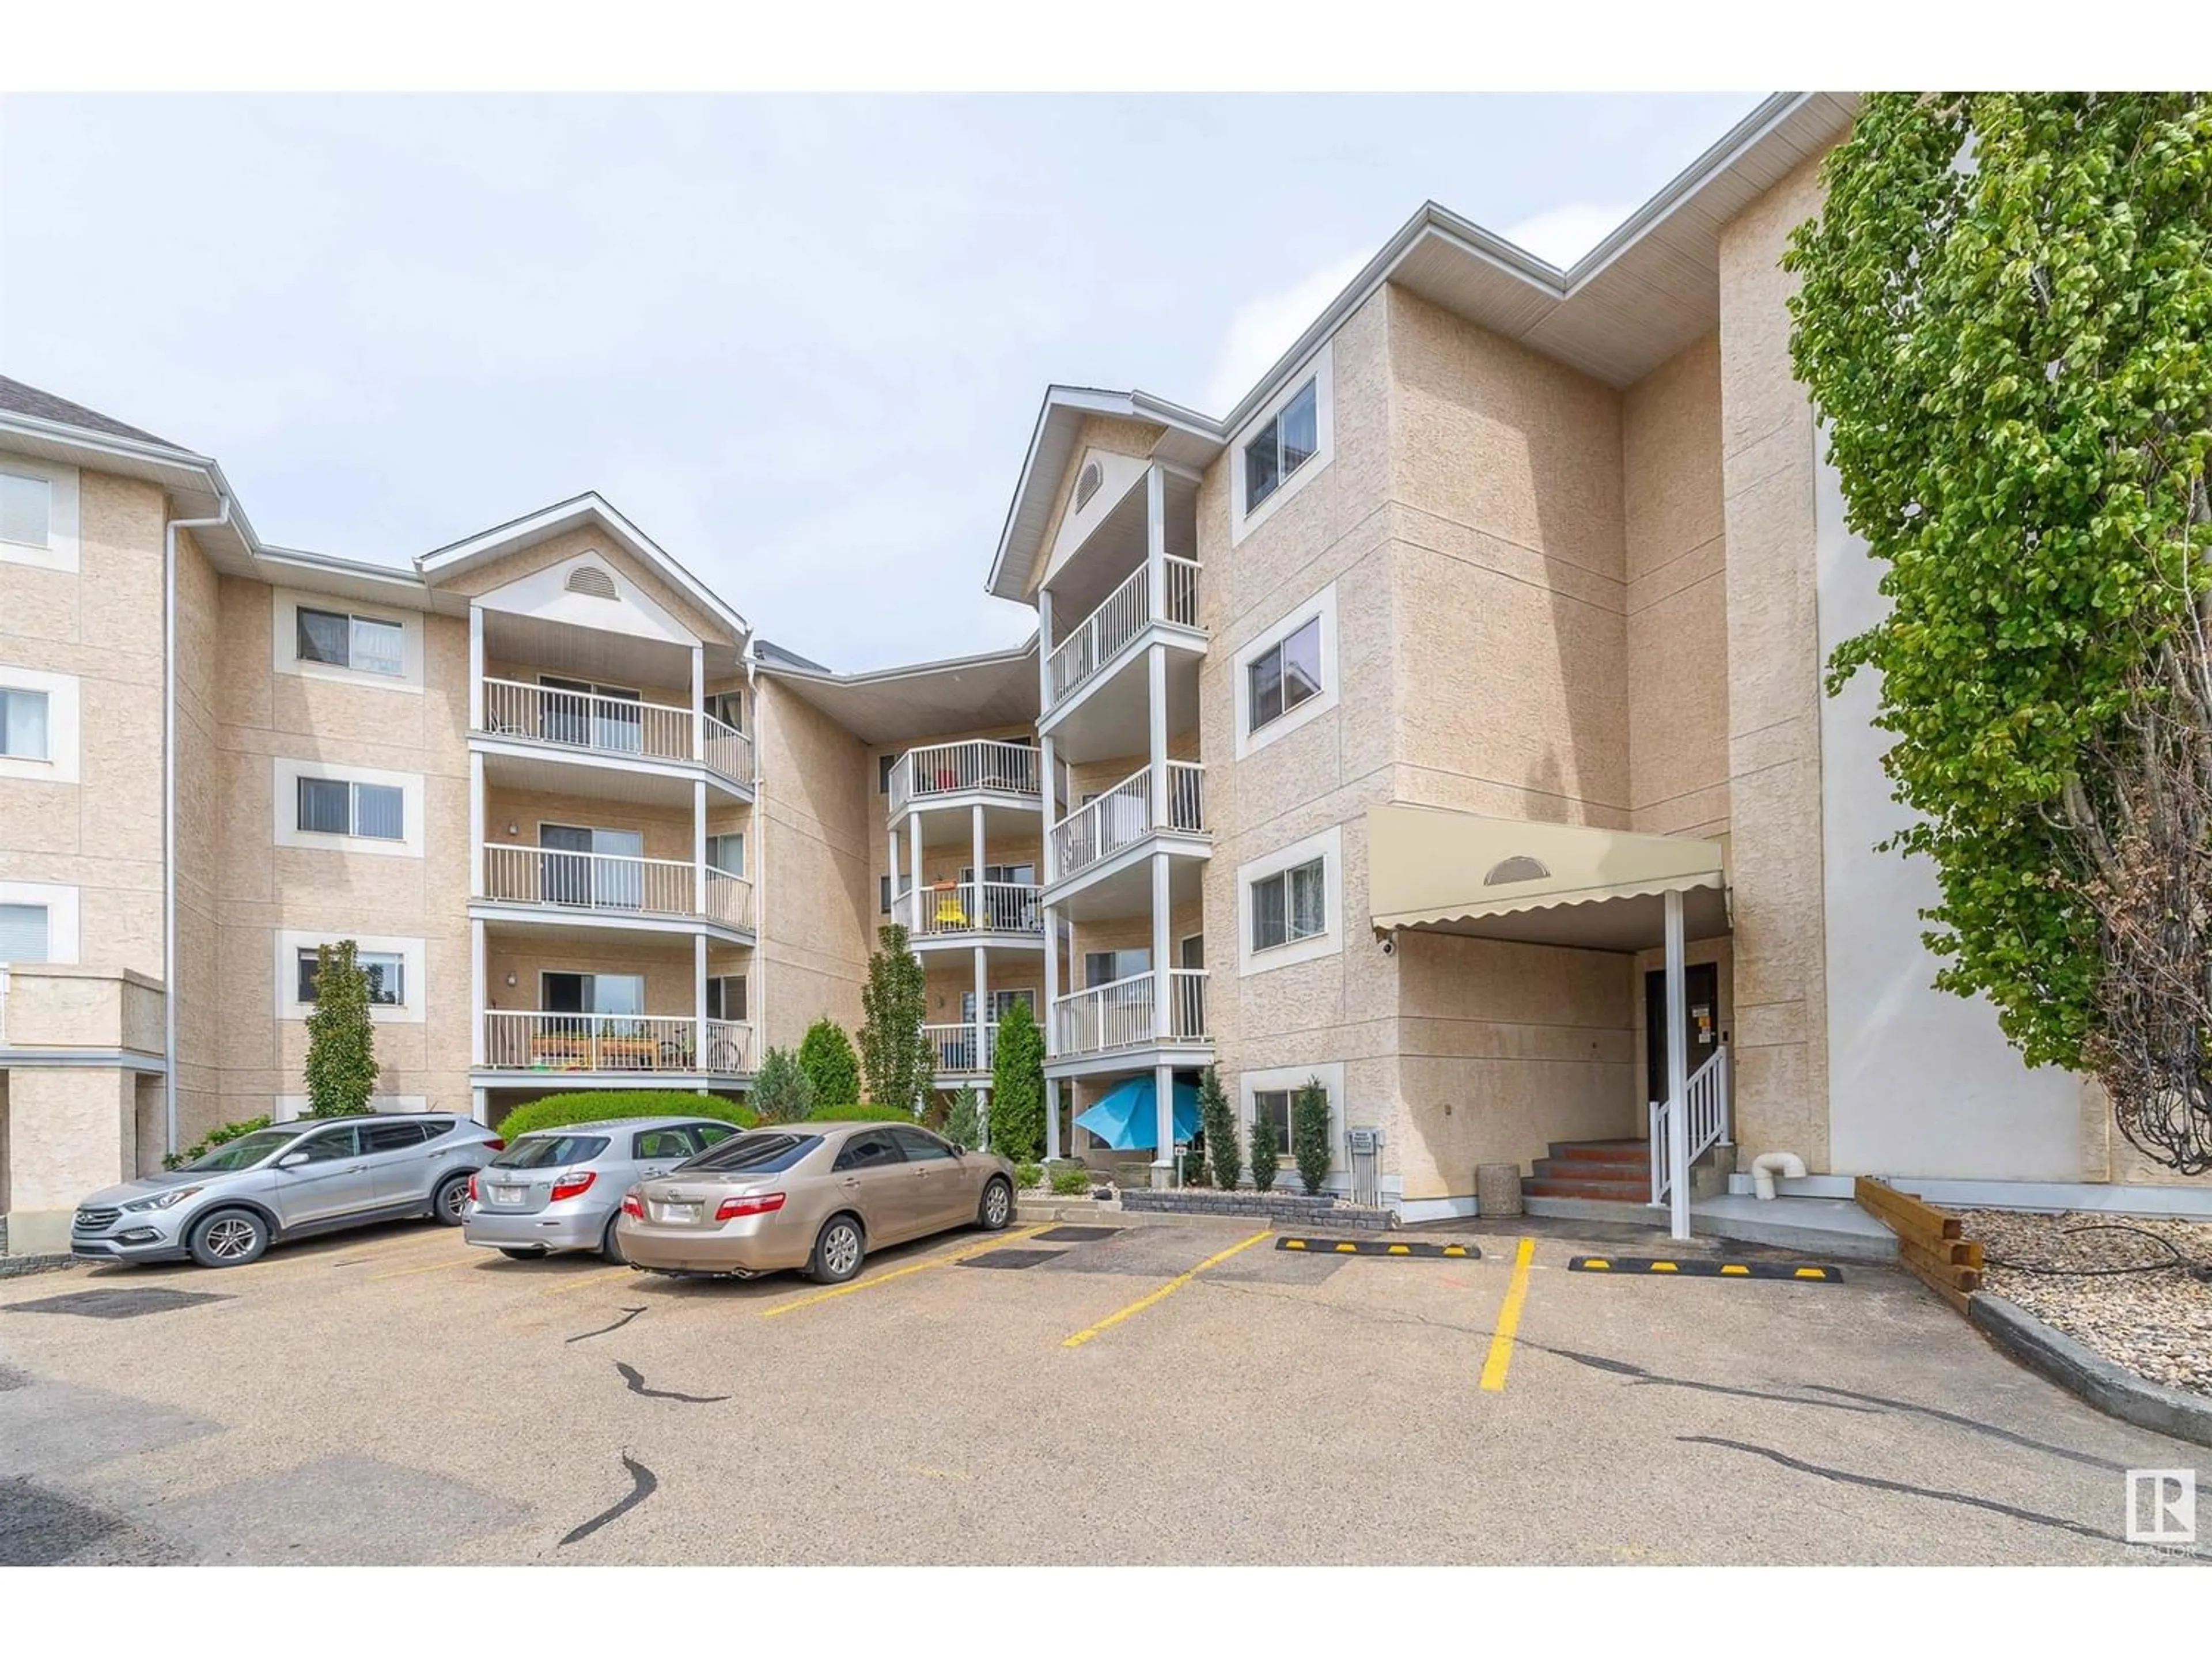 A pic from exterior of the house or condo for #214 11620 9A AV NW, Edmonton Alberta T6J7B4